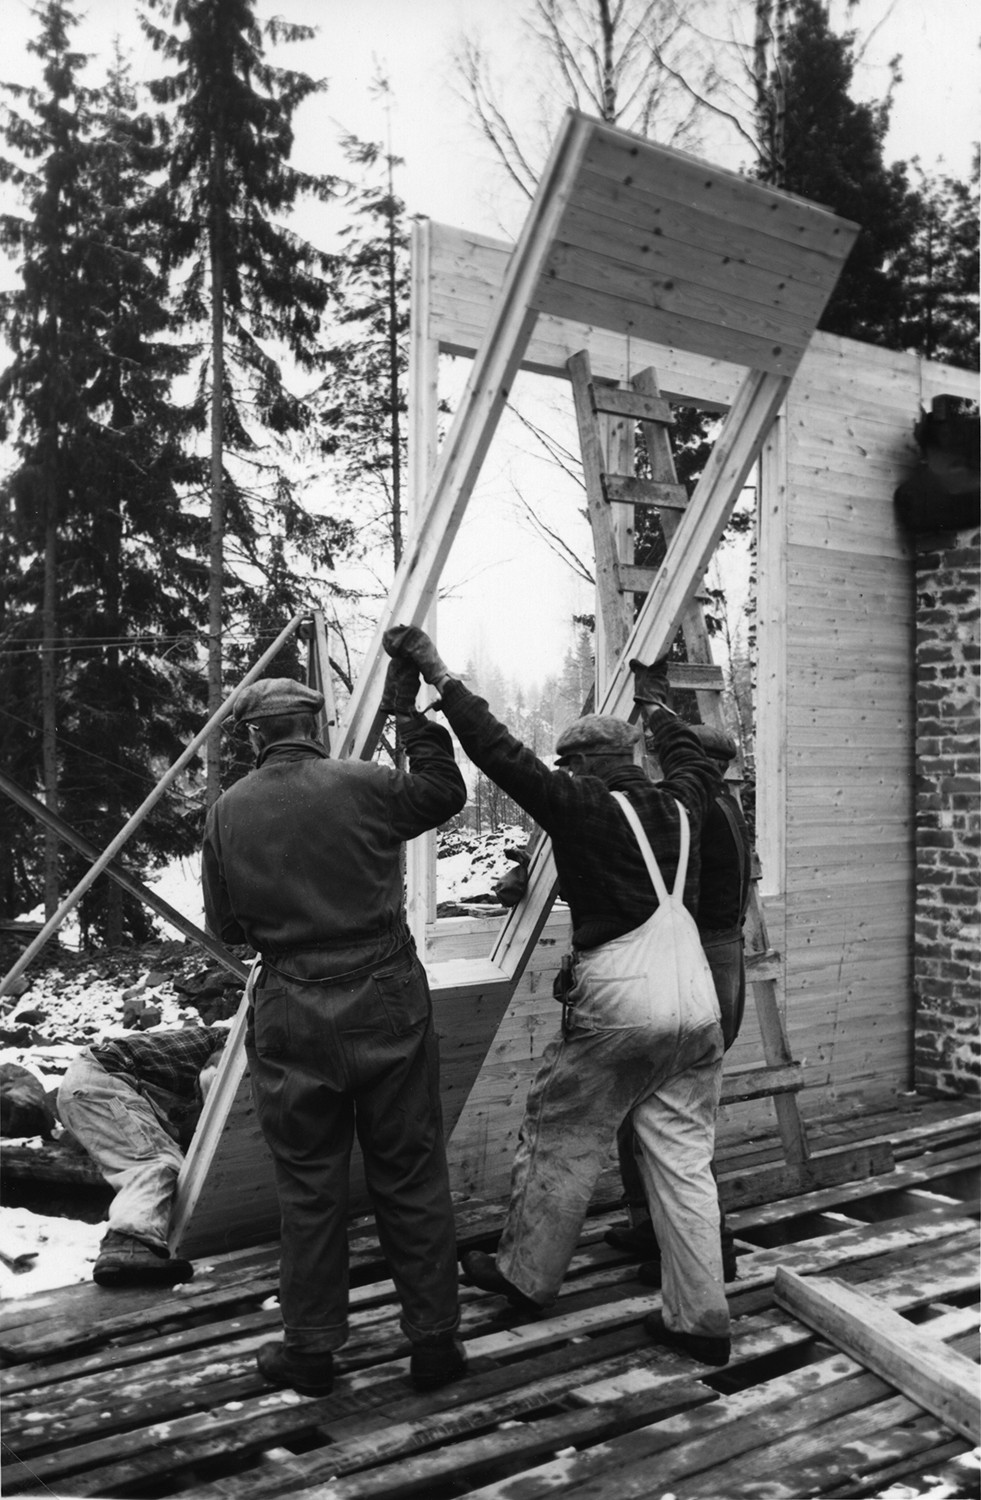 A black and white photo of three workers putting up a wall of a wooden Puutalo school.